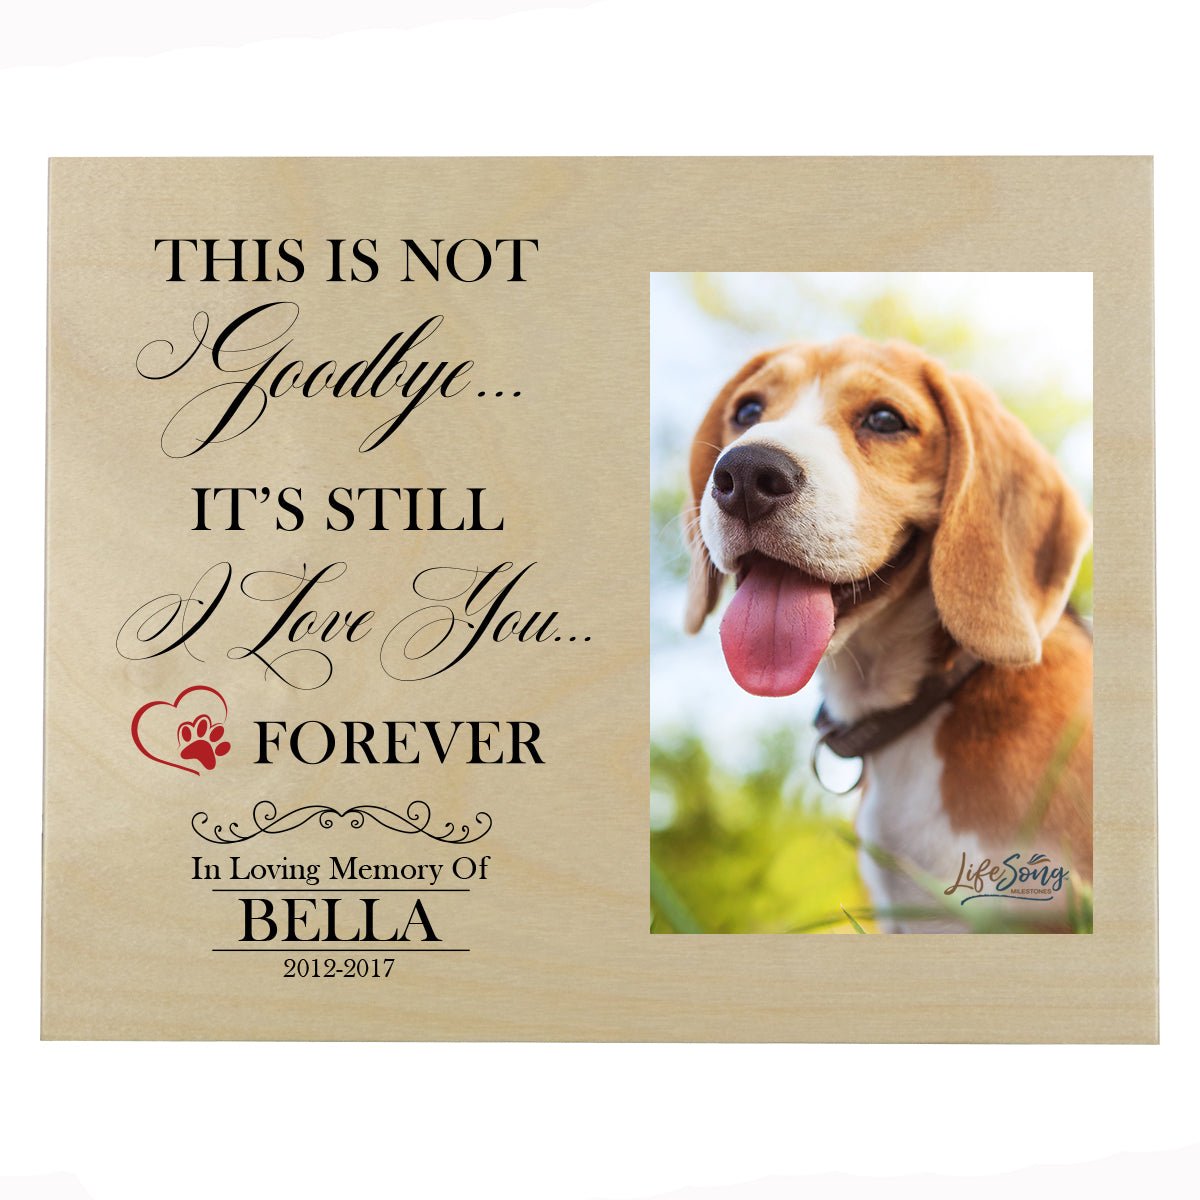 Pet Memorial Photo Wall Plaque Décor - This Is Not Goodbye - LifeSong Milestones